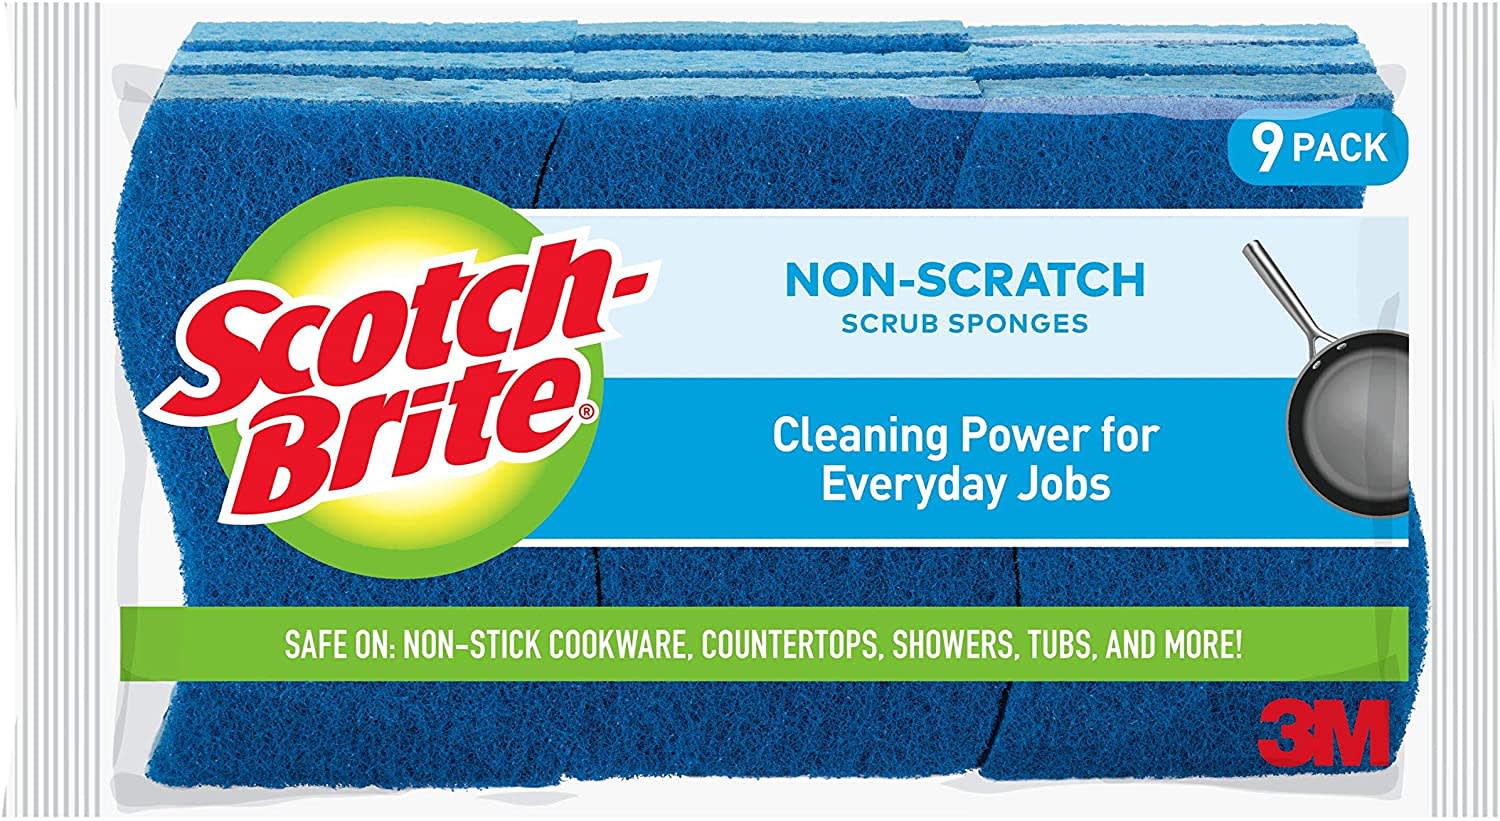 Scotch-Brite Little Handy Scrubber Brush, Small & Versatile Cleaning Tool  with Long Lasting Bristles, 6 Scrub Brushes